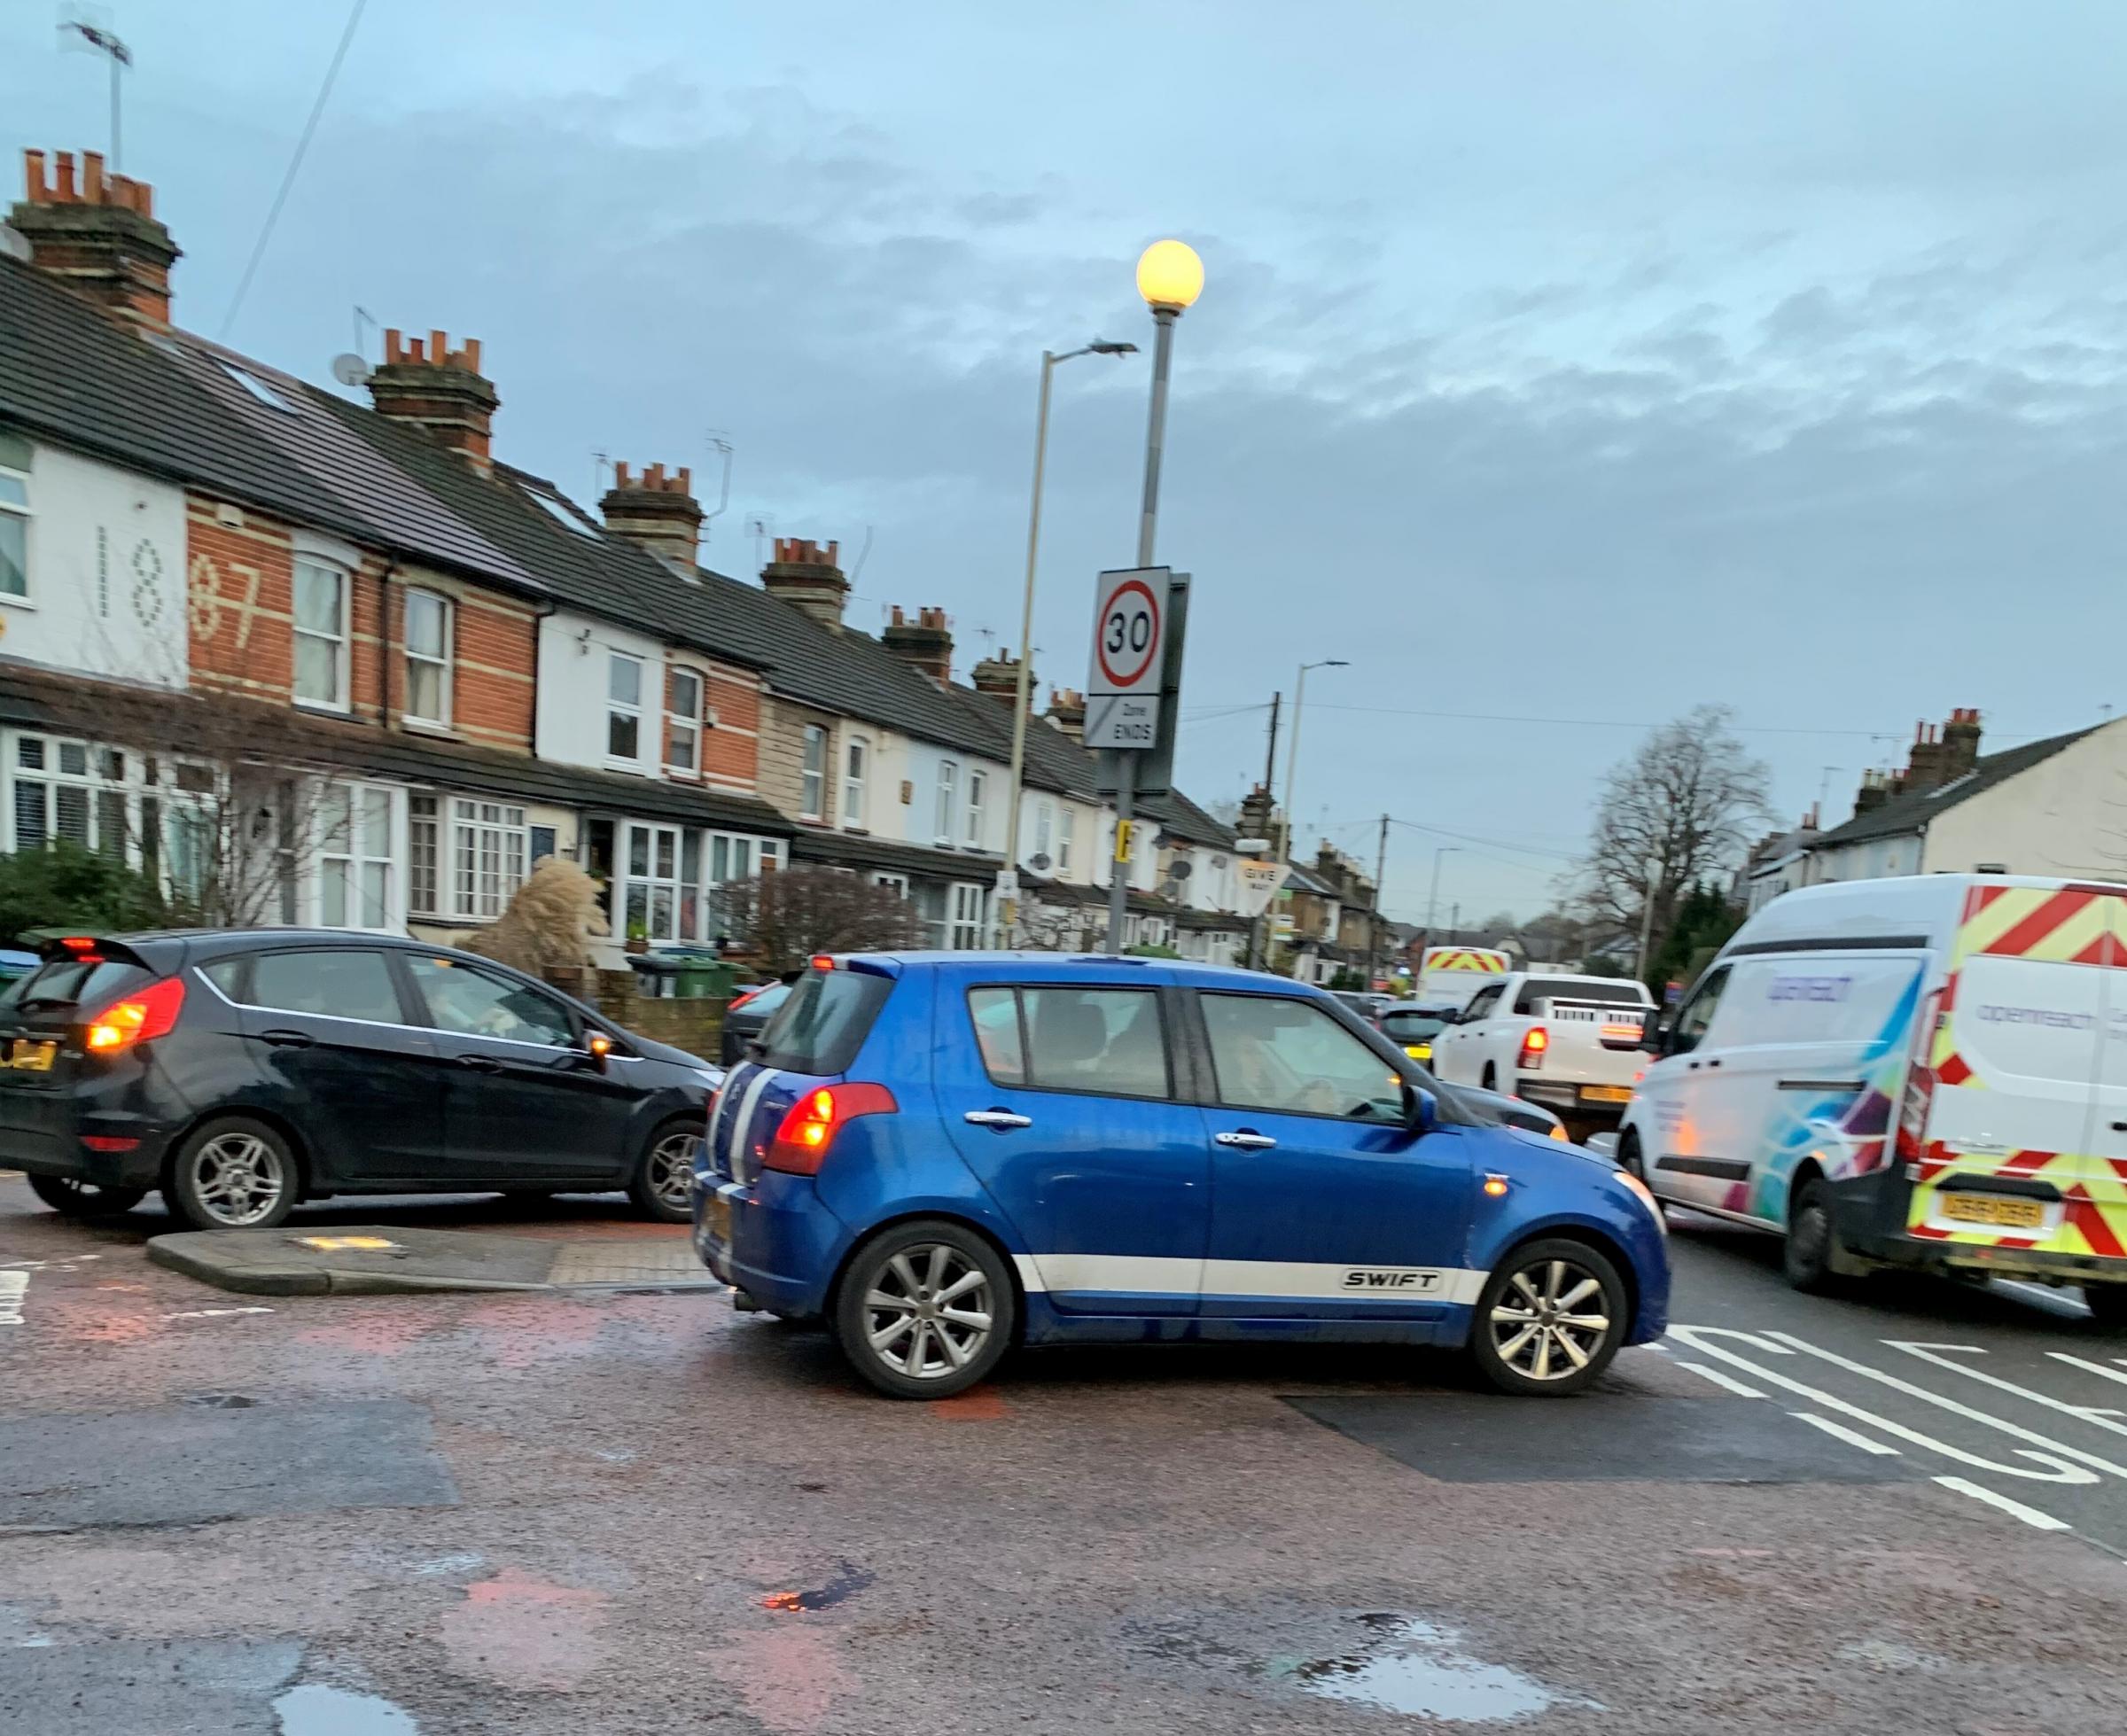 Many cars take an unsafe turn at the junction of Oxhey Avenue / Pinner Road